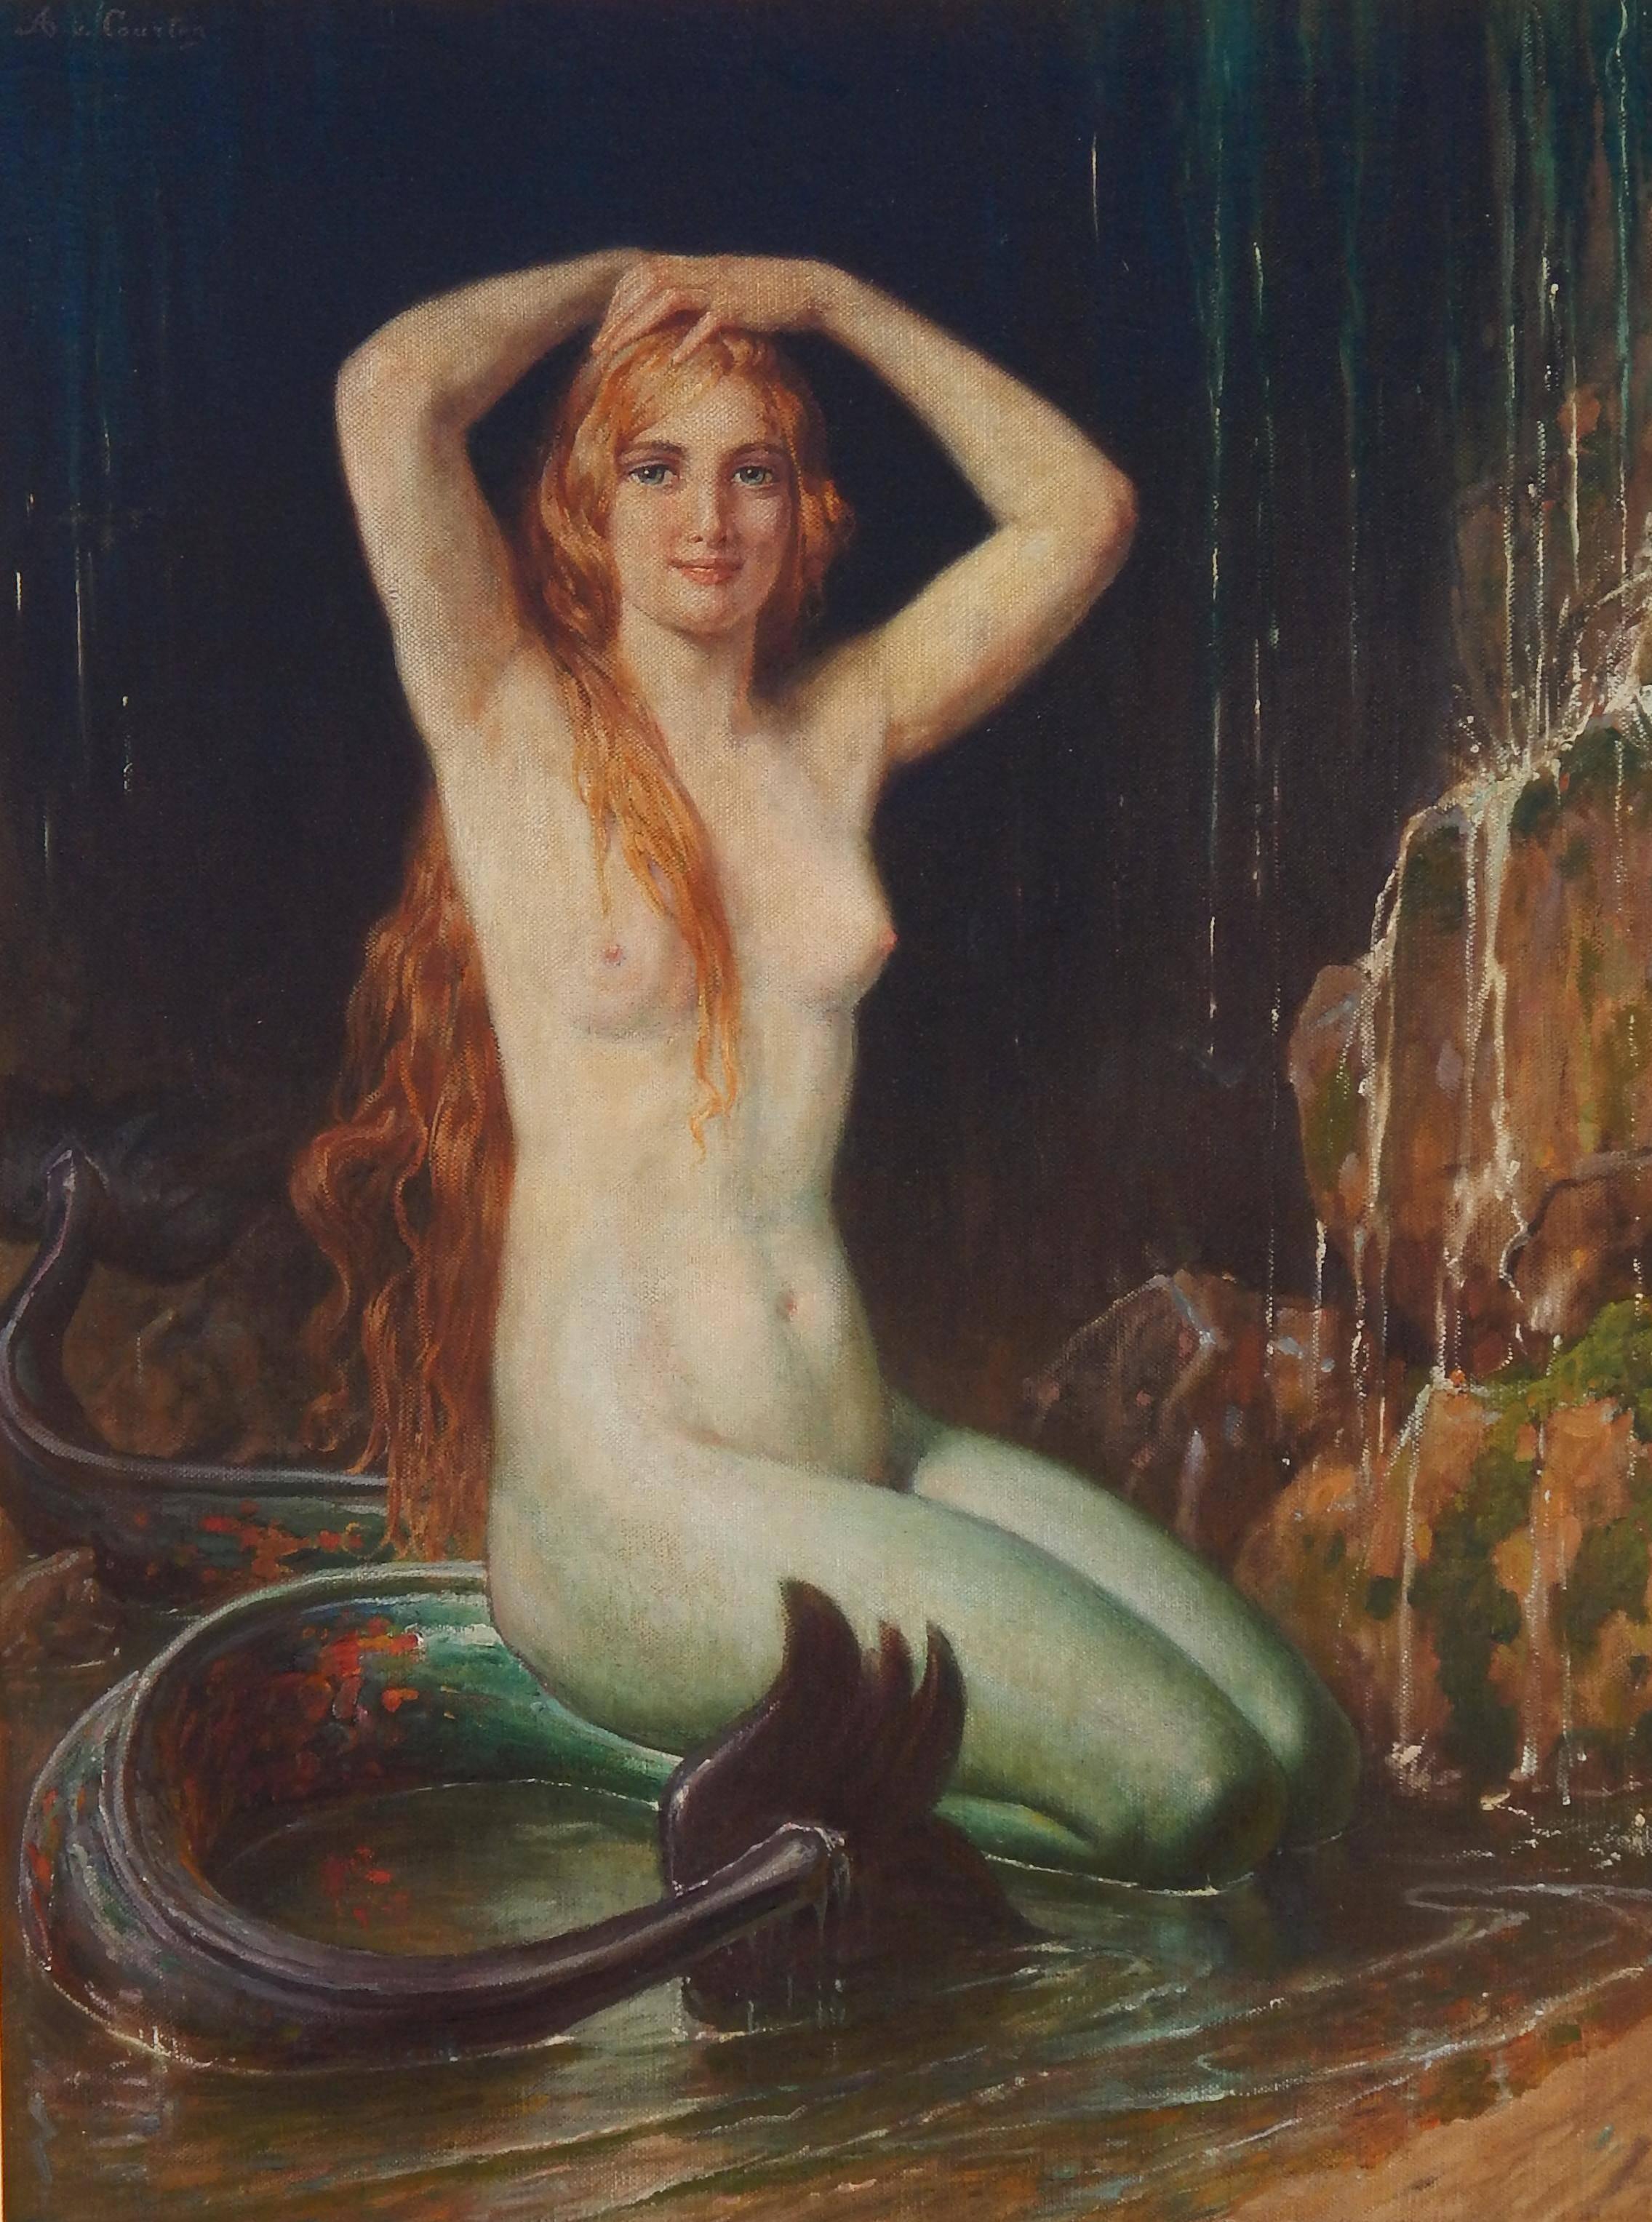 Art Nouveau mermaid painting by Italian artist 
Angelo von Courten (1848-1925.)
This large painting is in excellent condition measuring 39 1/2